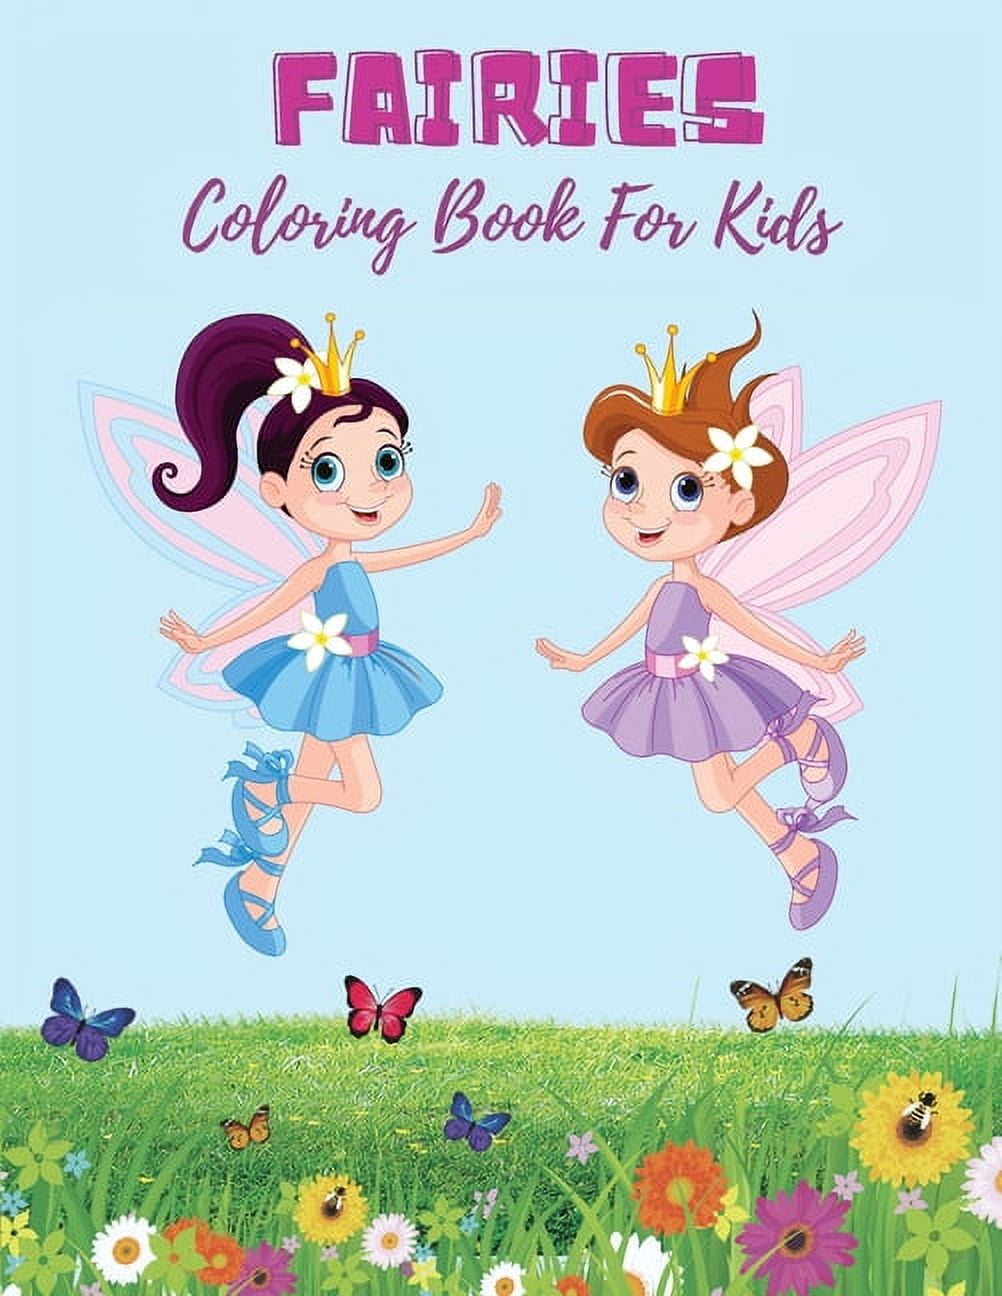 Fairy Coloring Book for girls ages 8-12: Cute adorable fantasy magical  drawings of fairies dragons & magical castles colored book for girls kids  with (Paperback)